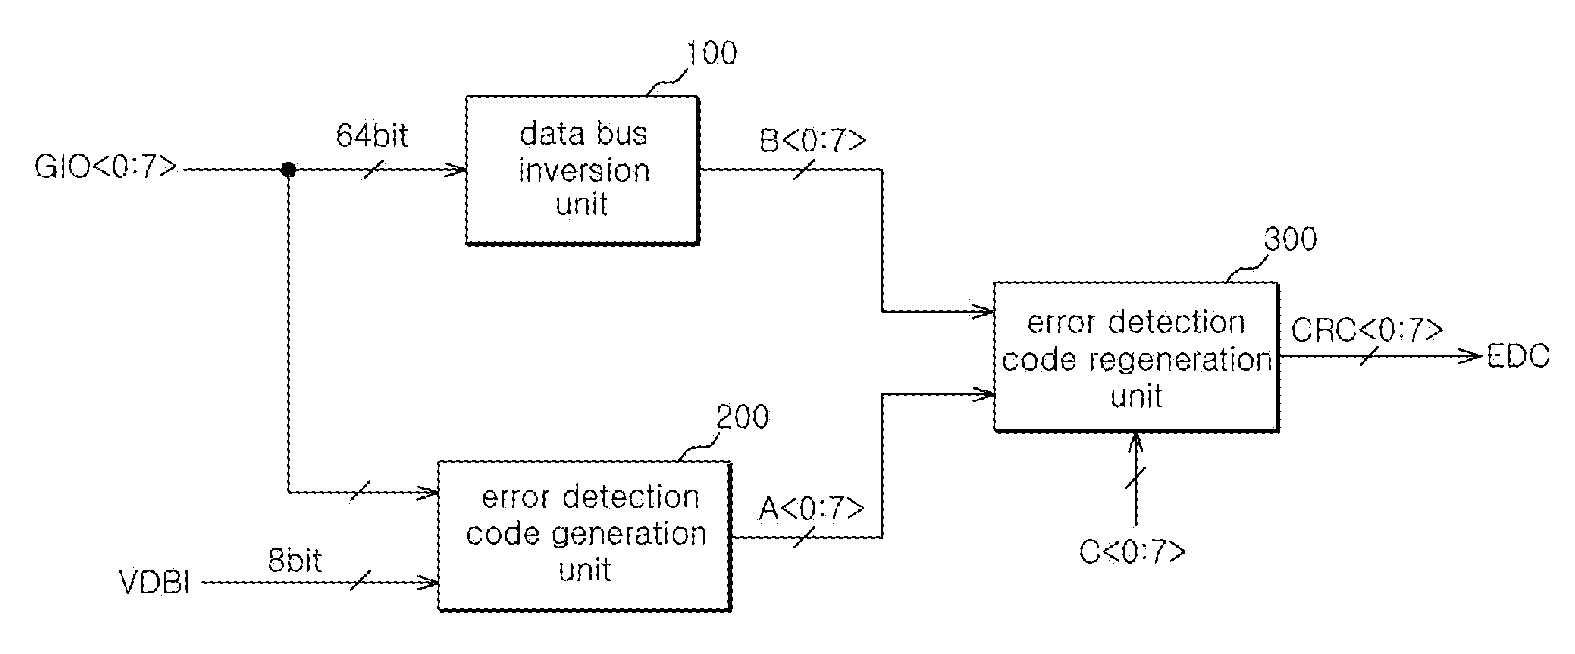 Apparatus and method for generating error detection codes